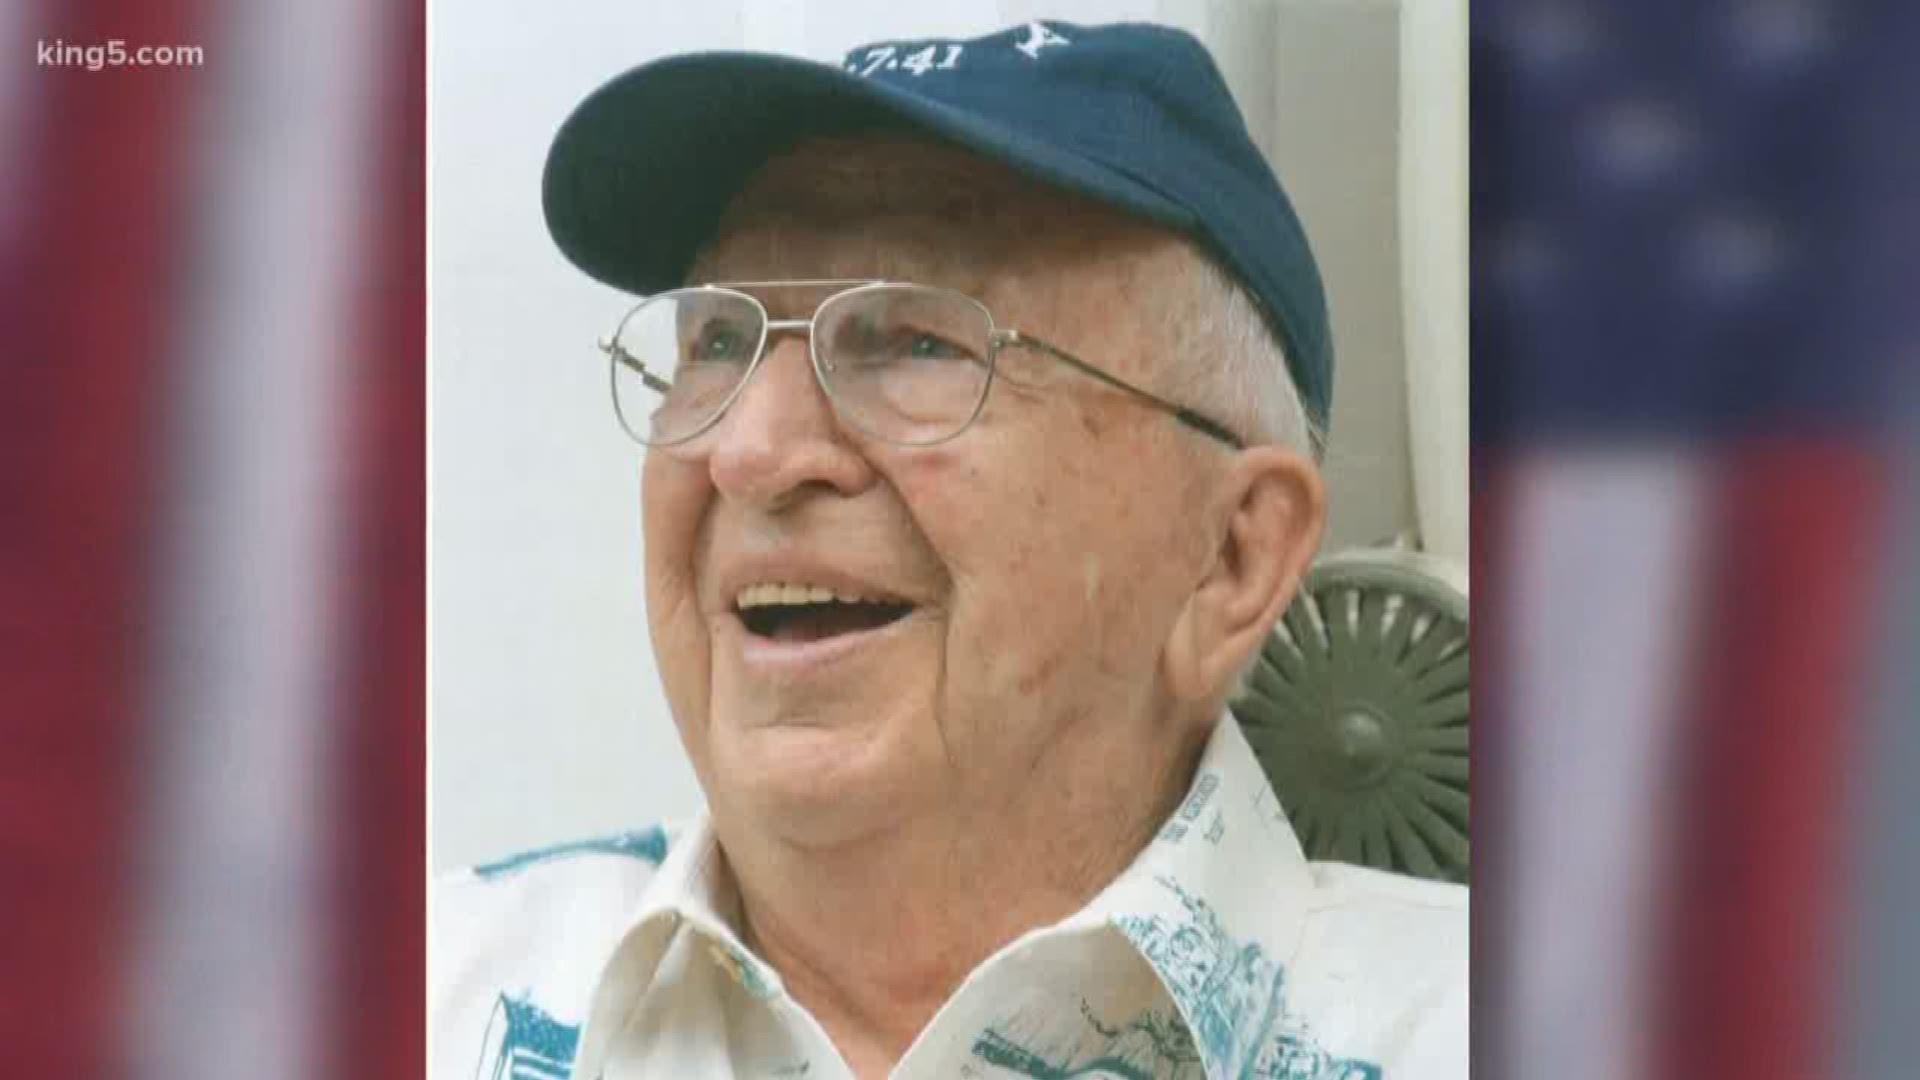 One of the last remaining USS Arizona survivors died in September.